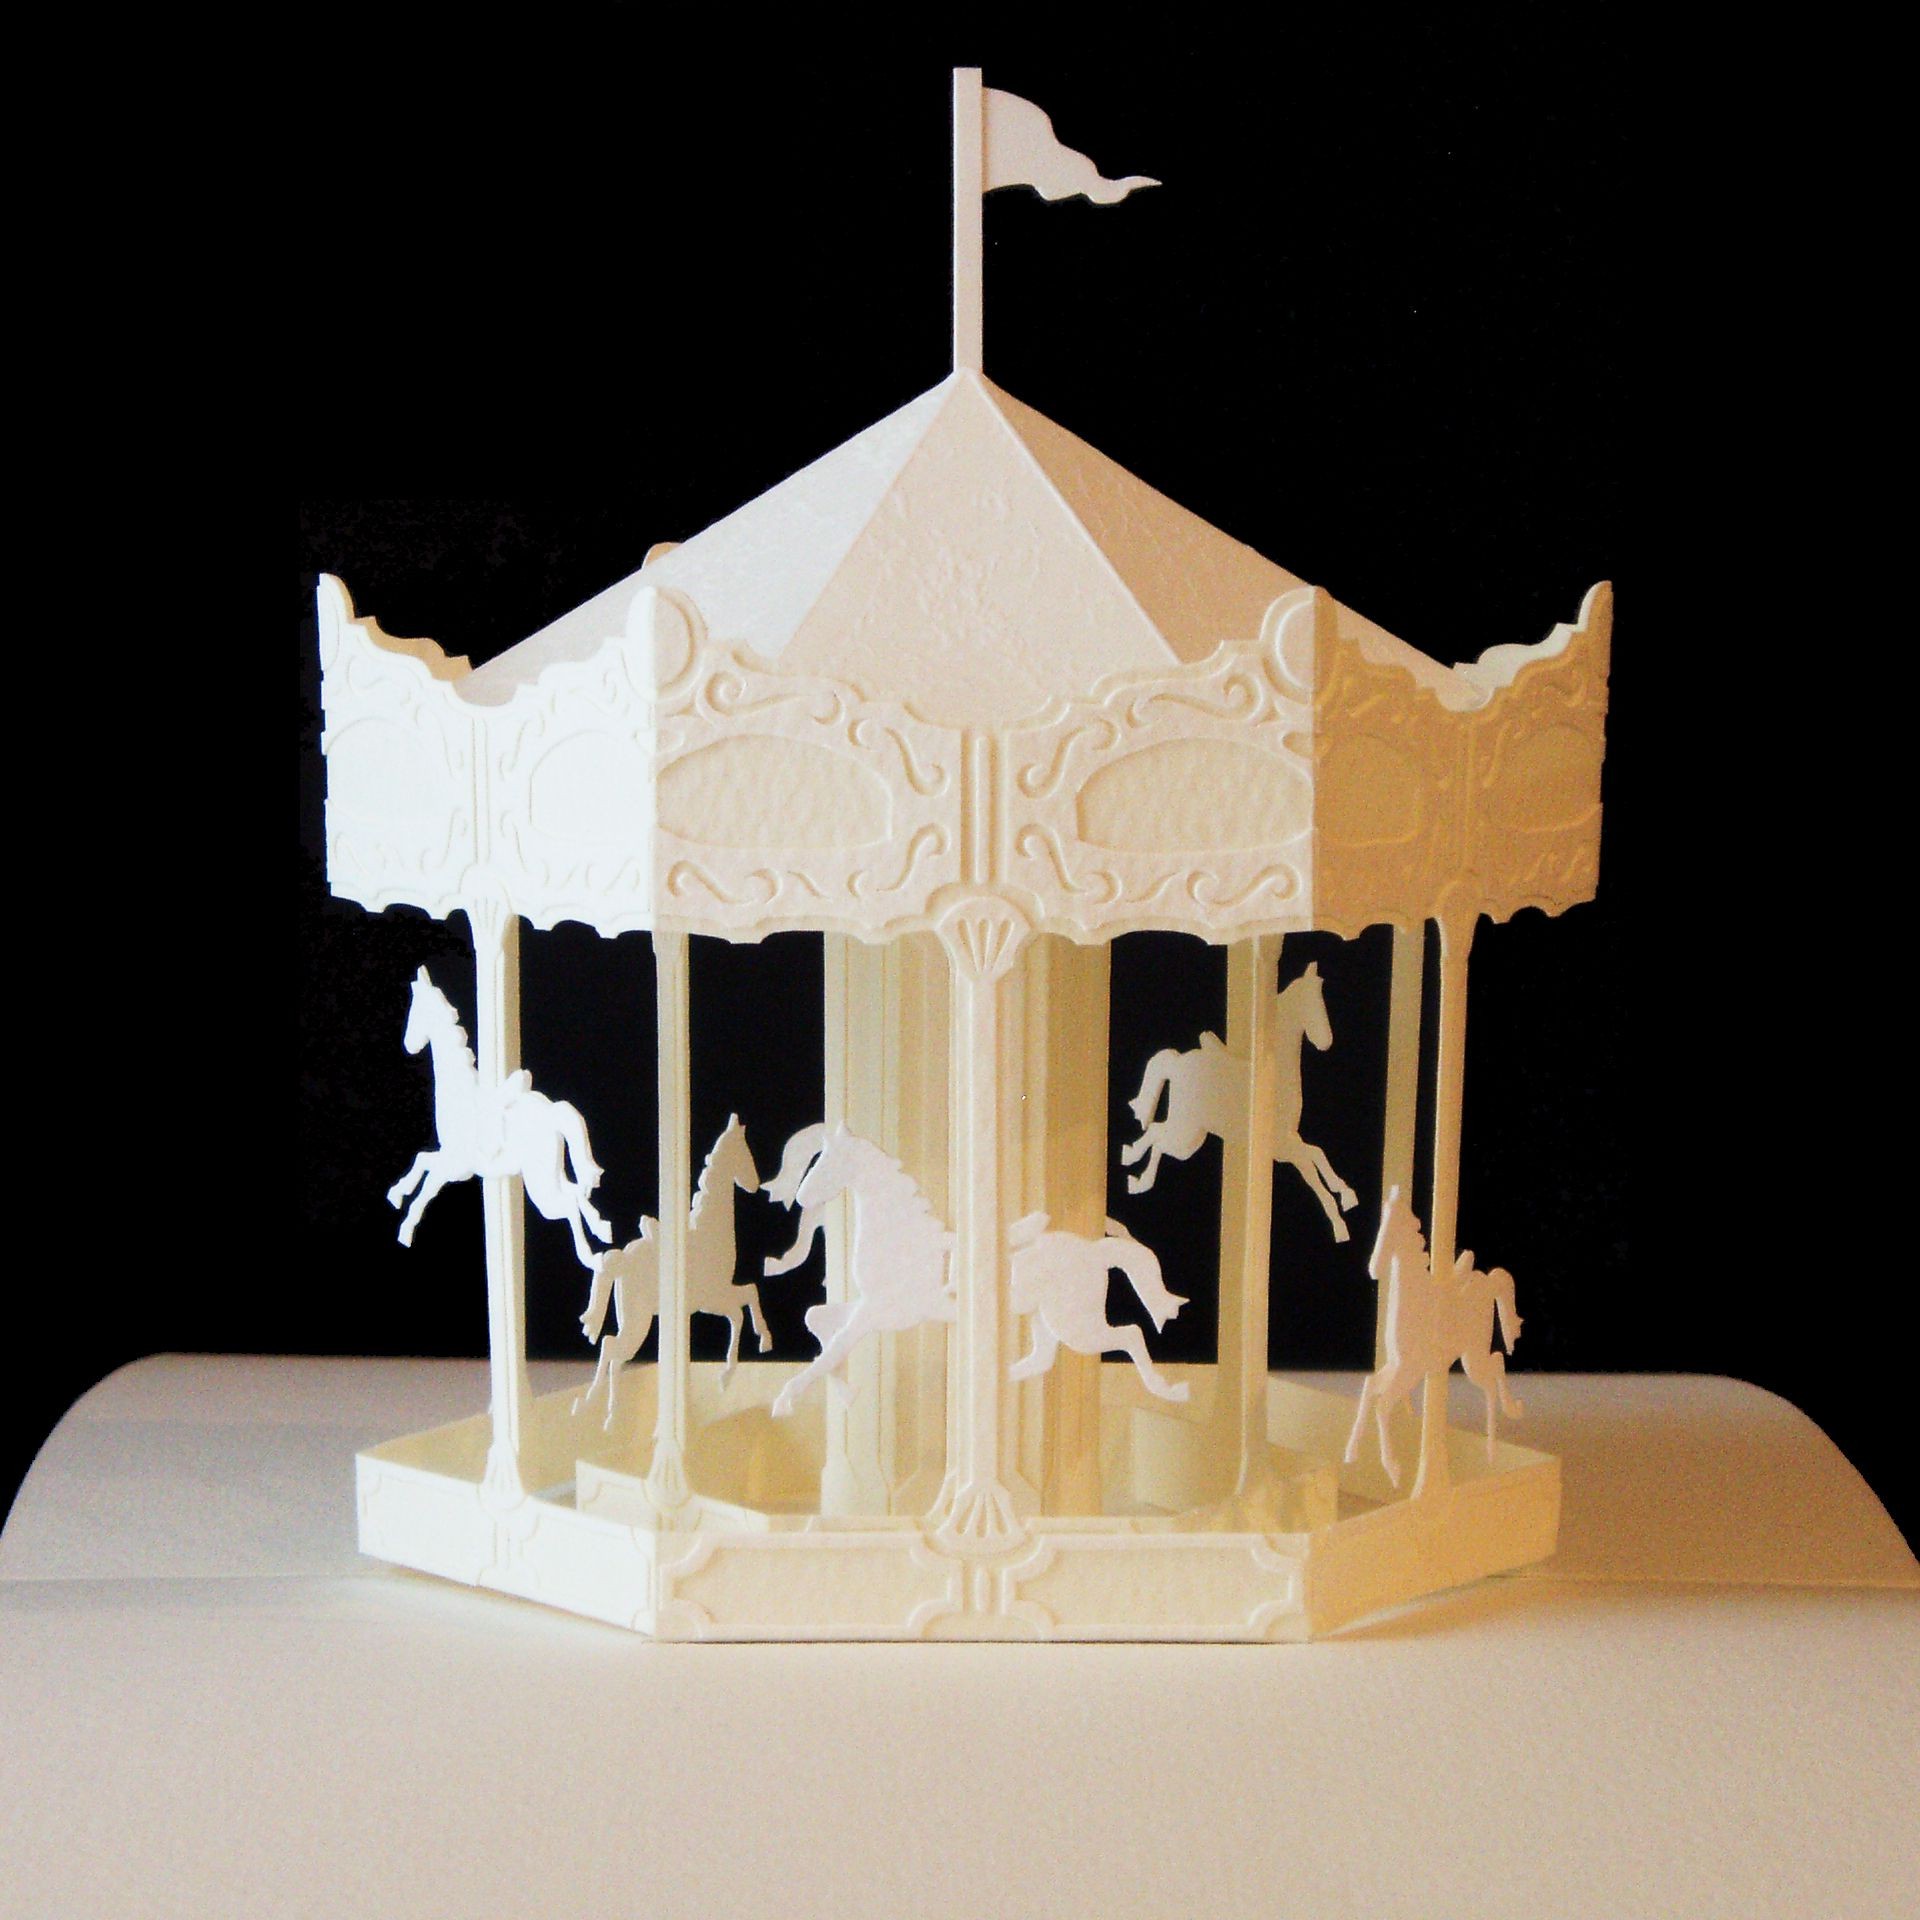 Papercraft Architecture Merry Go Round Pop Up Paper Craft This Artist S Work is Incredibly